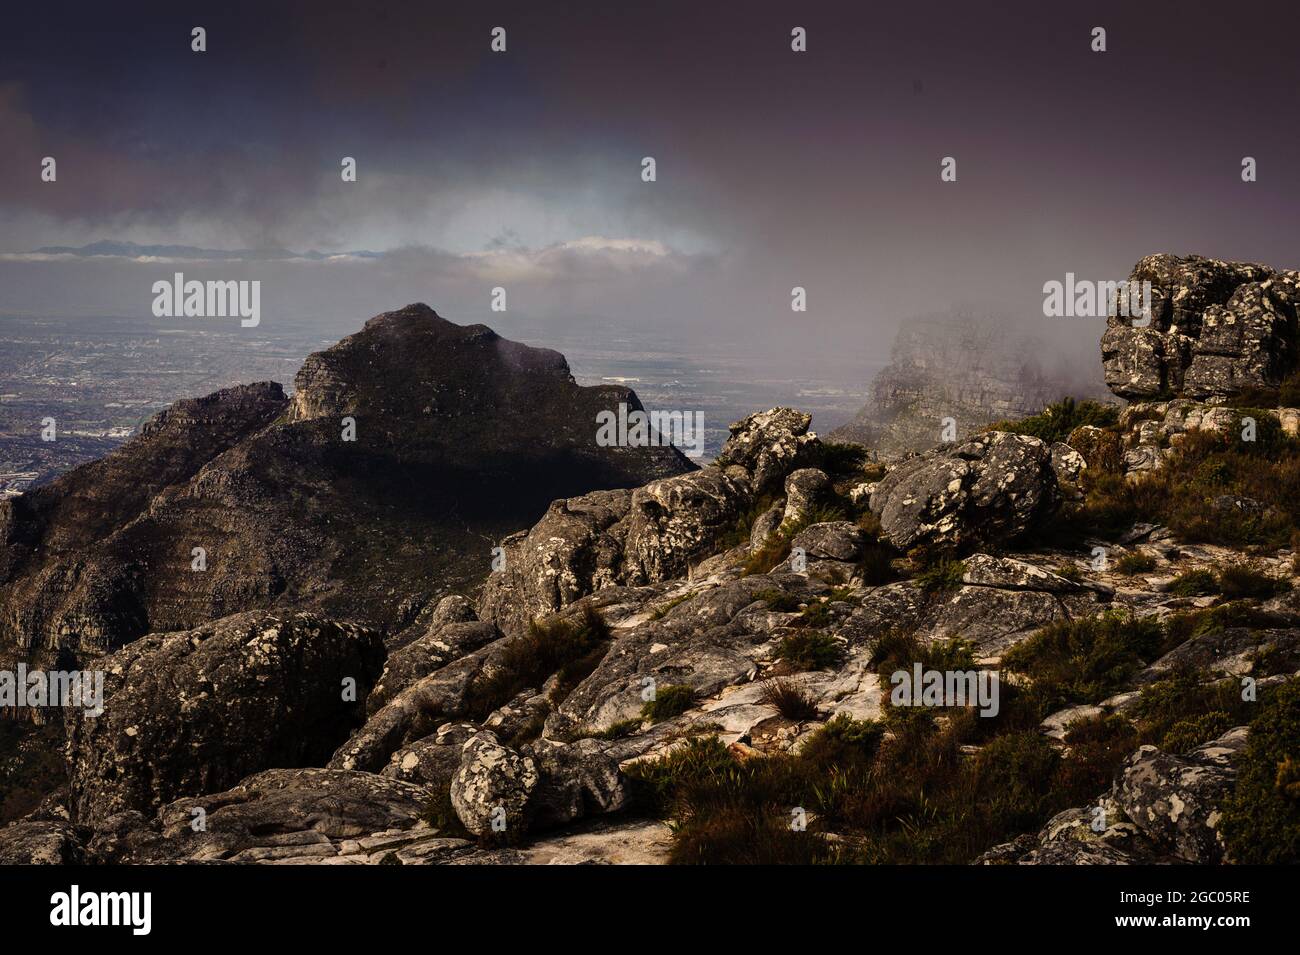 Devil's Peak is seen from Cape Town's landmark Table Mountain during the southern hemisphere's winter months in South Africa Stock Photo